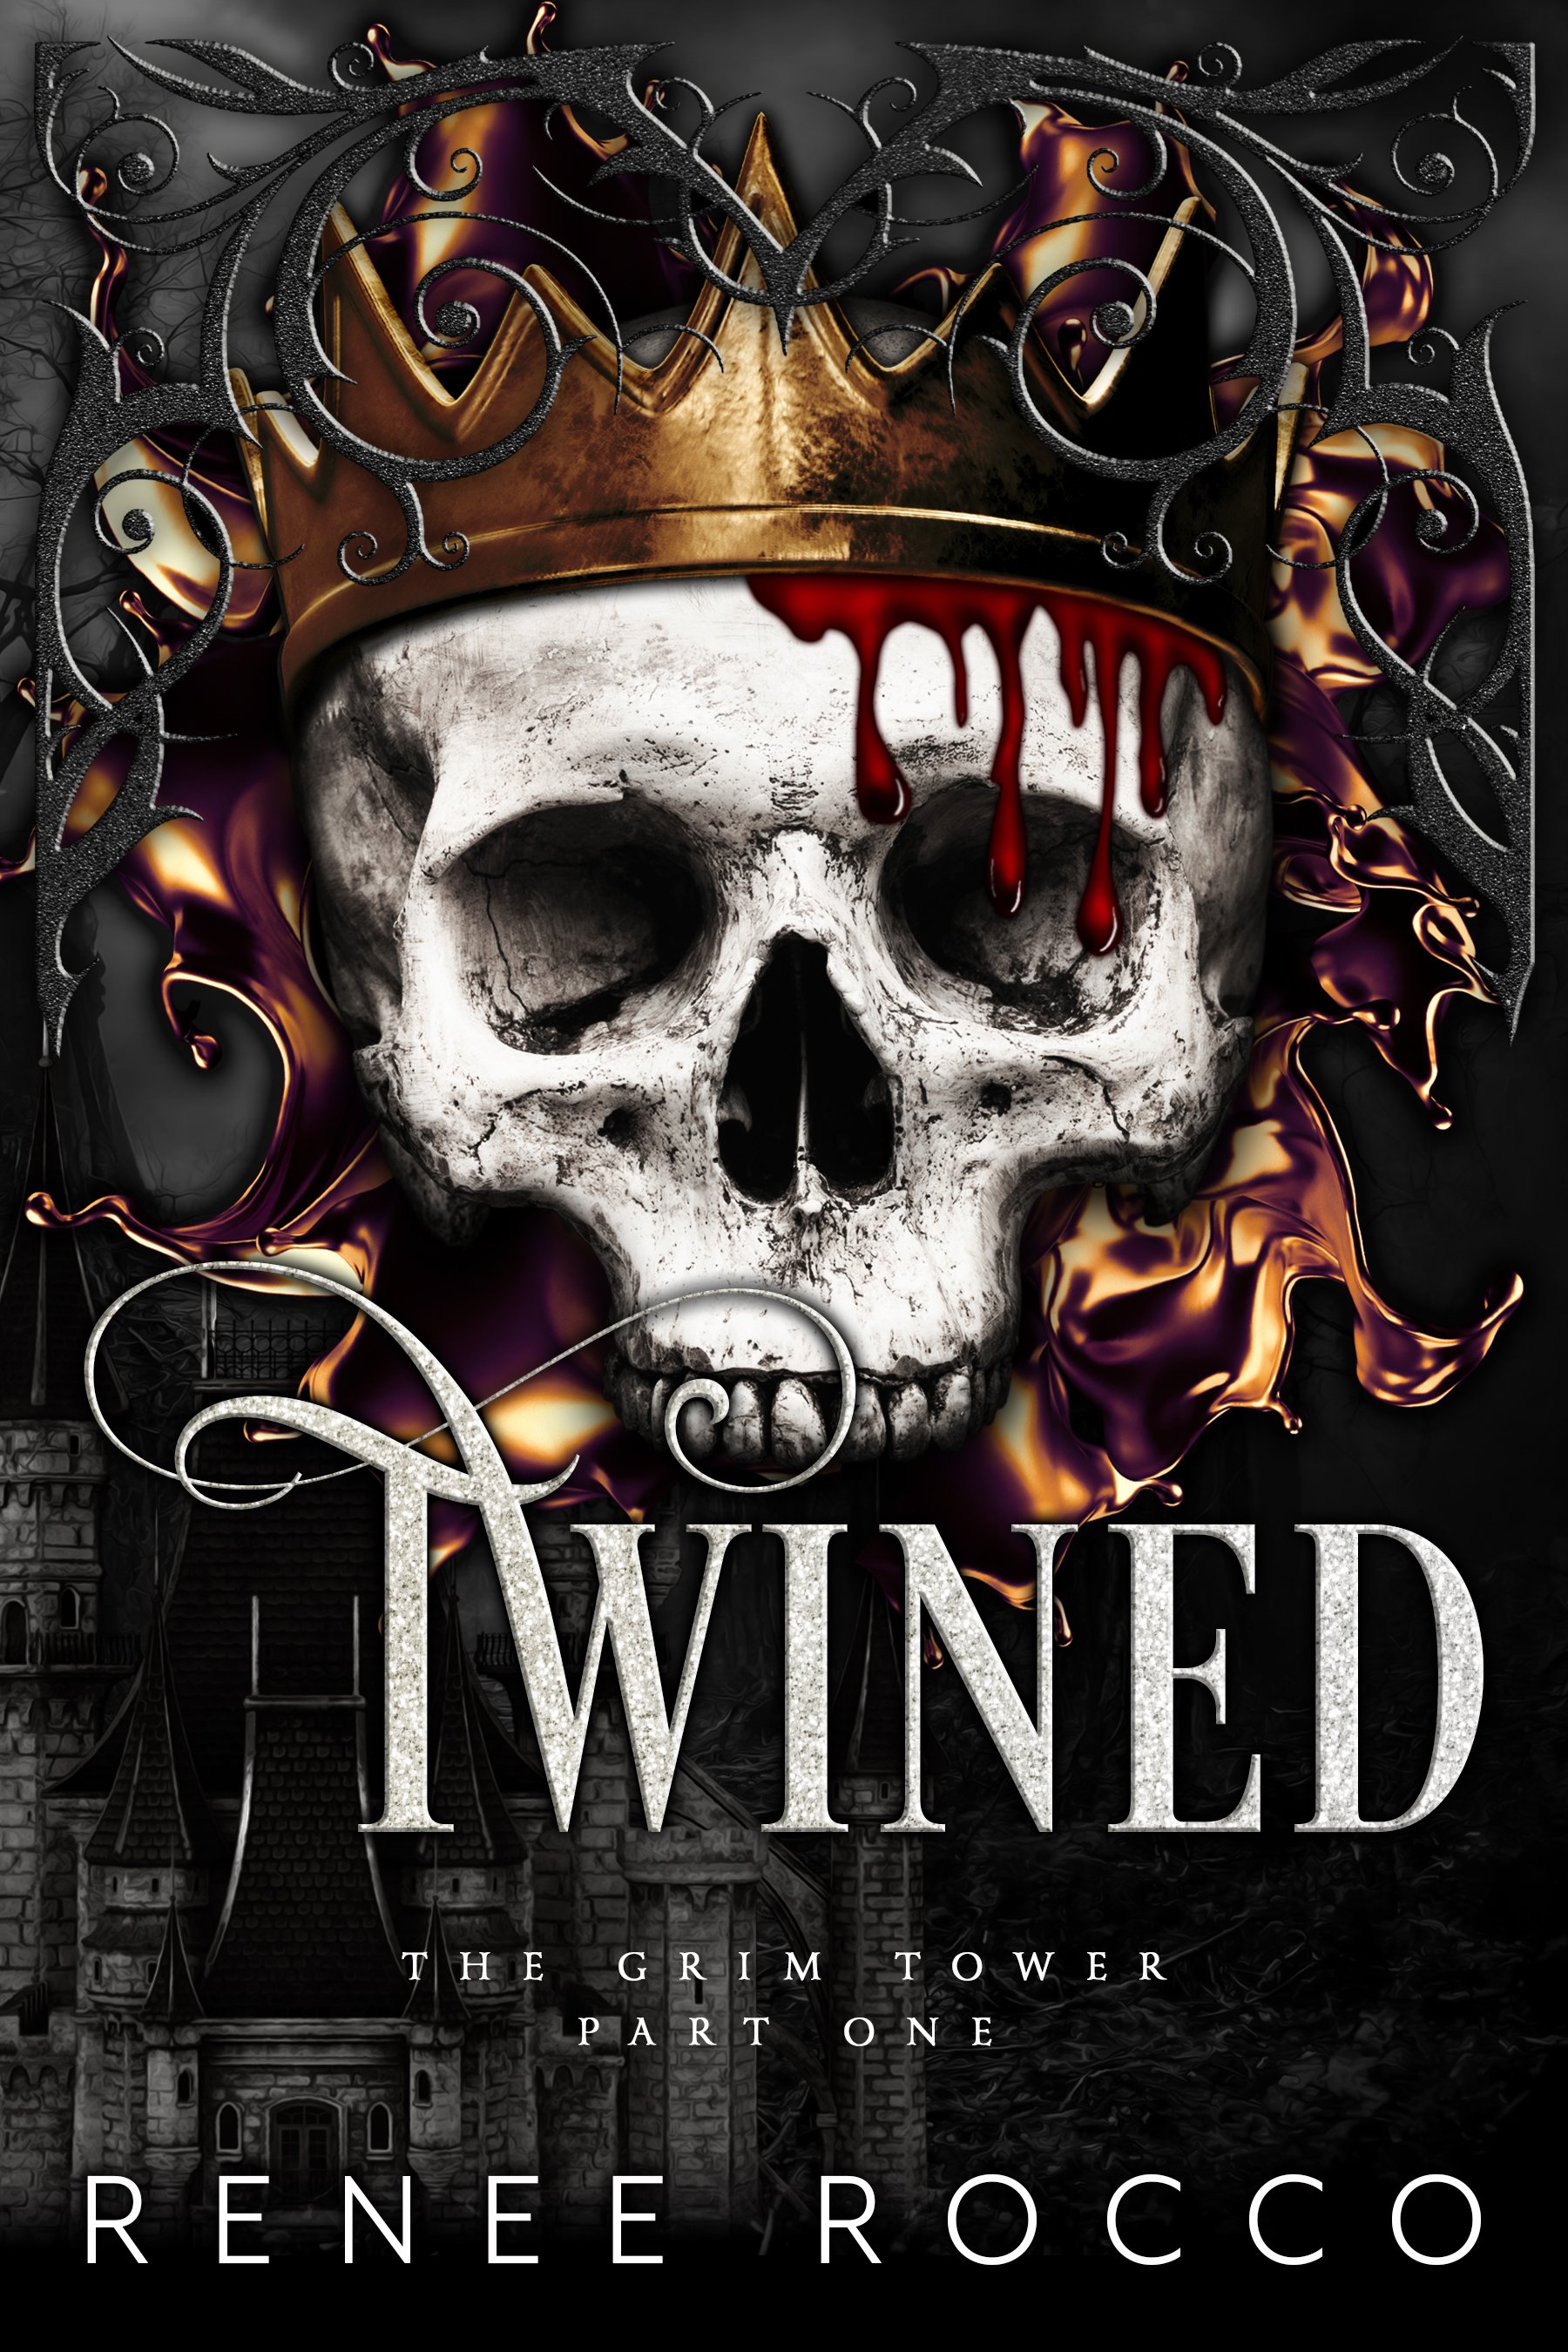 Twined by Renee Rocco